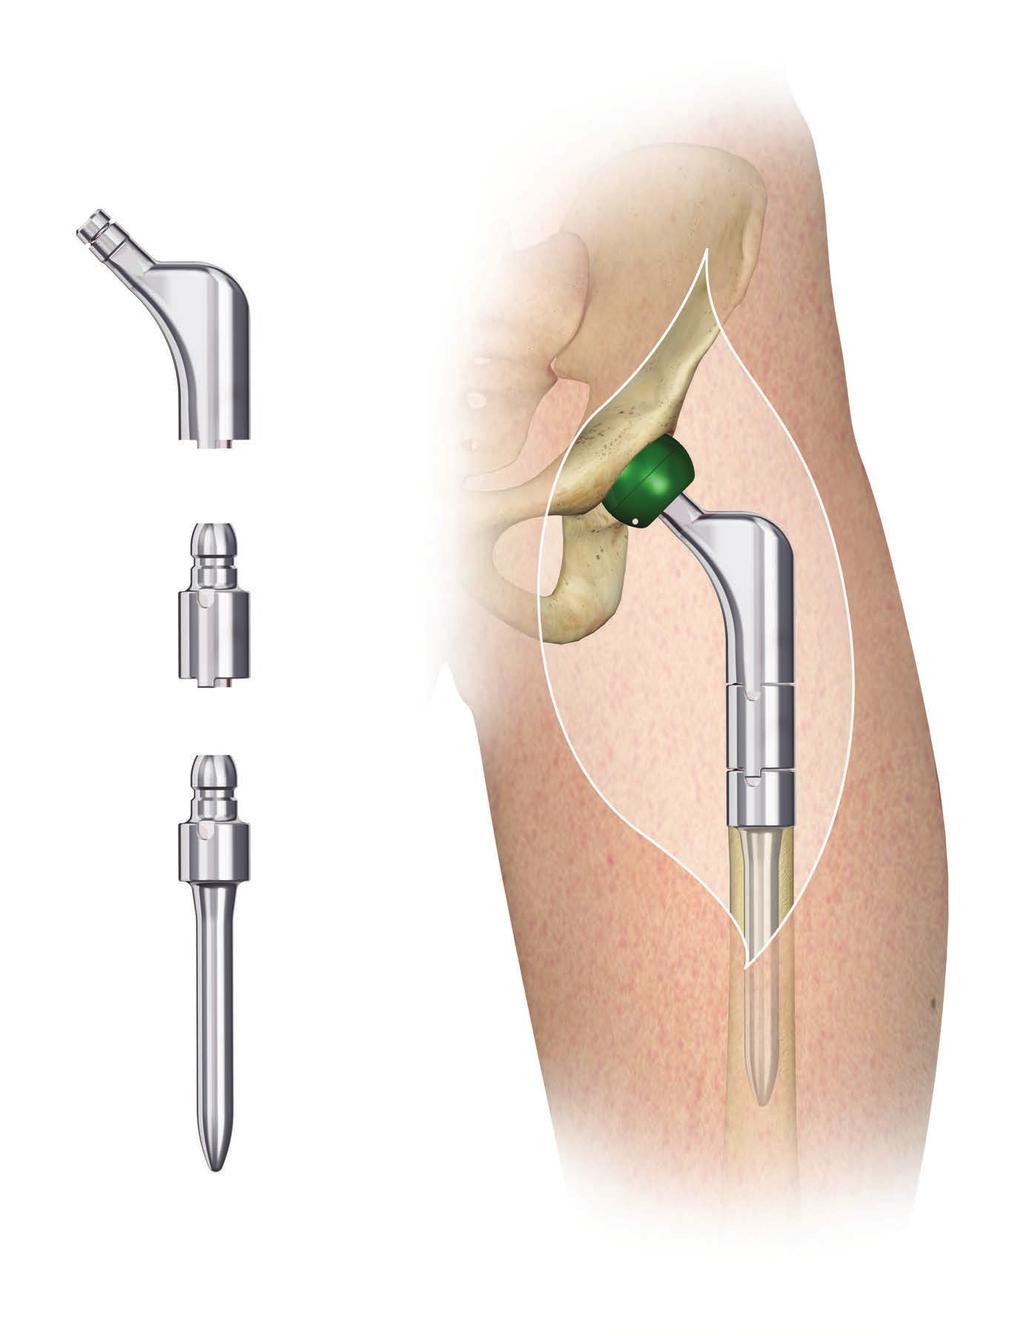 PROXIMAL FEMUR REPLACEMENT Alignment Mark If the soft tissues are tight, the leg length is slightly long and the implant s offset is excessive, evaluate the use of a shorter femoral head trial.